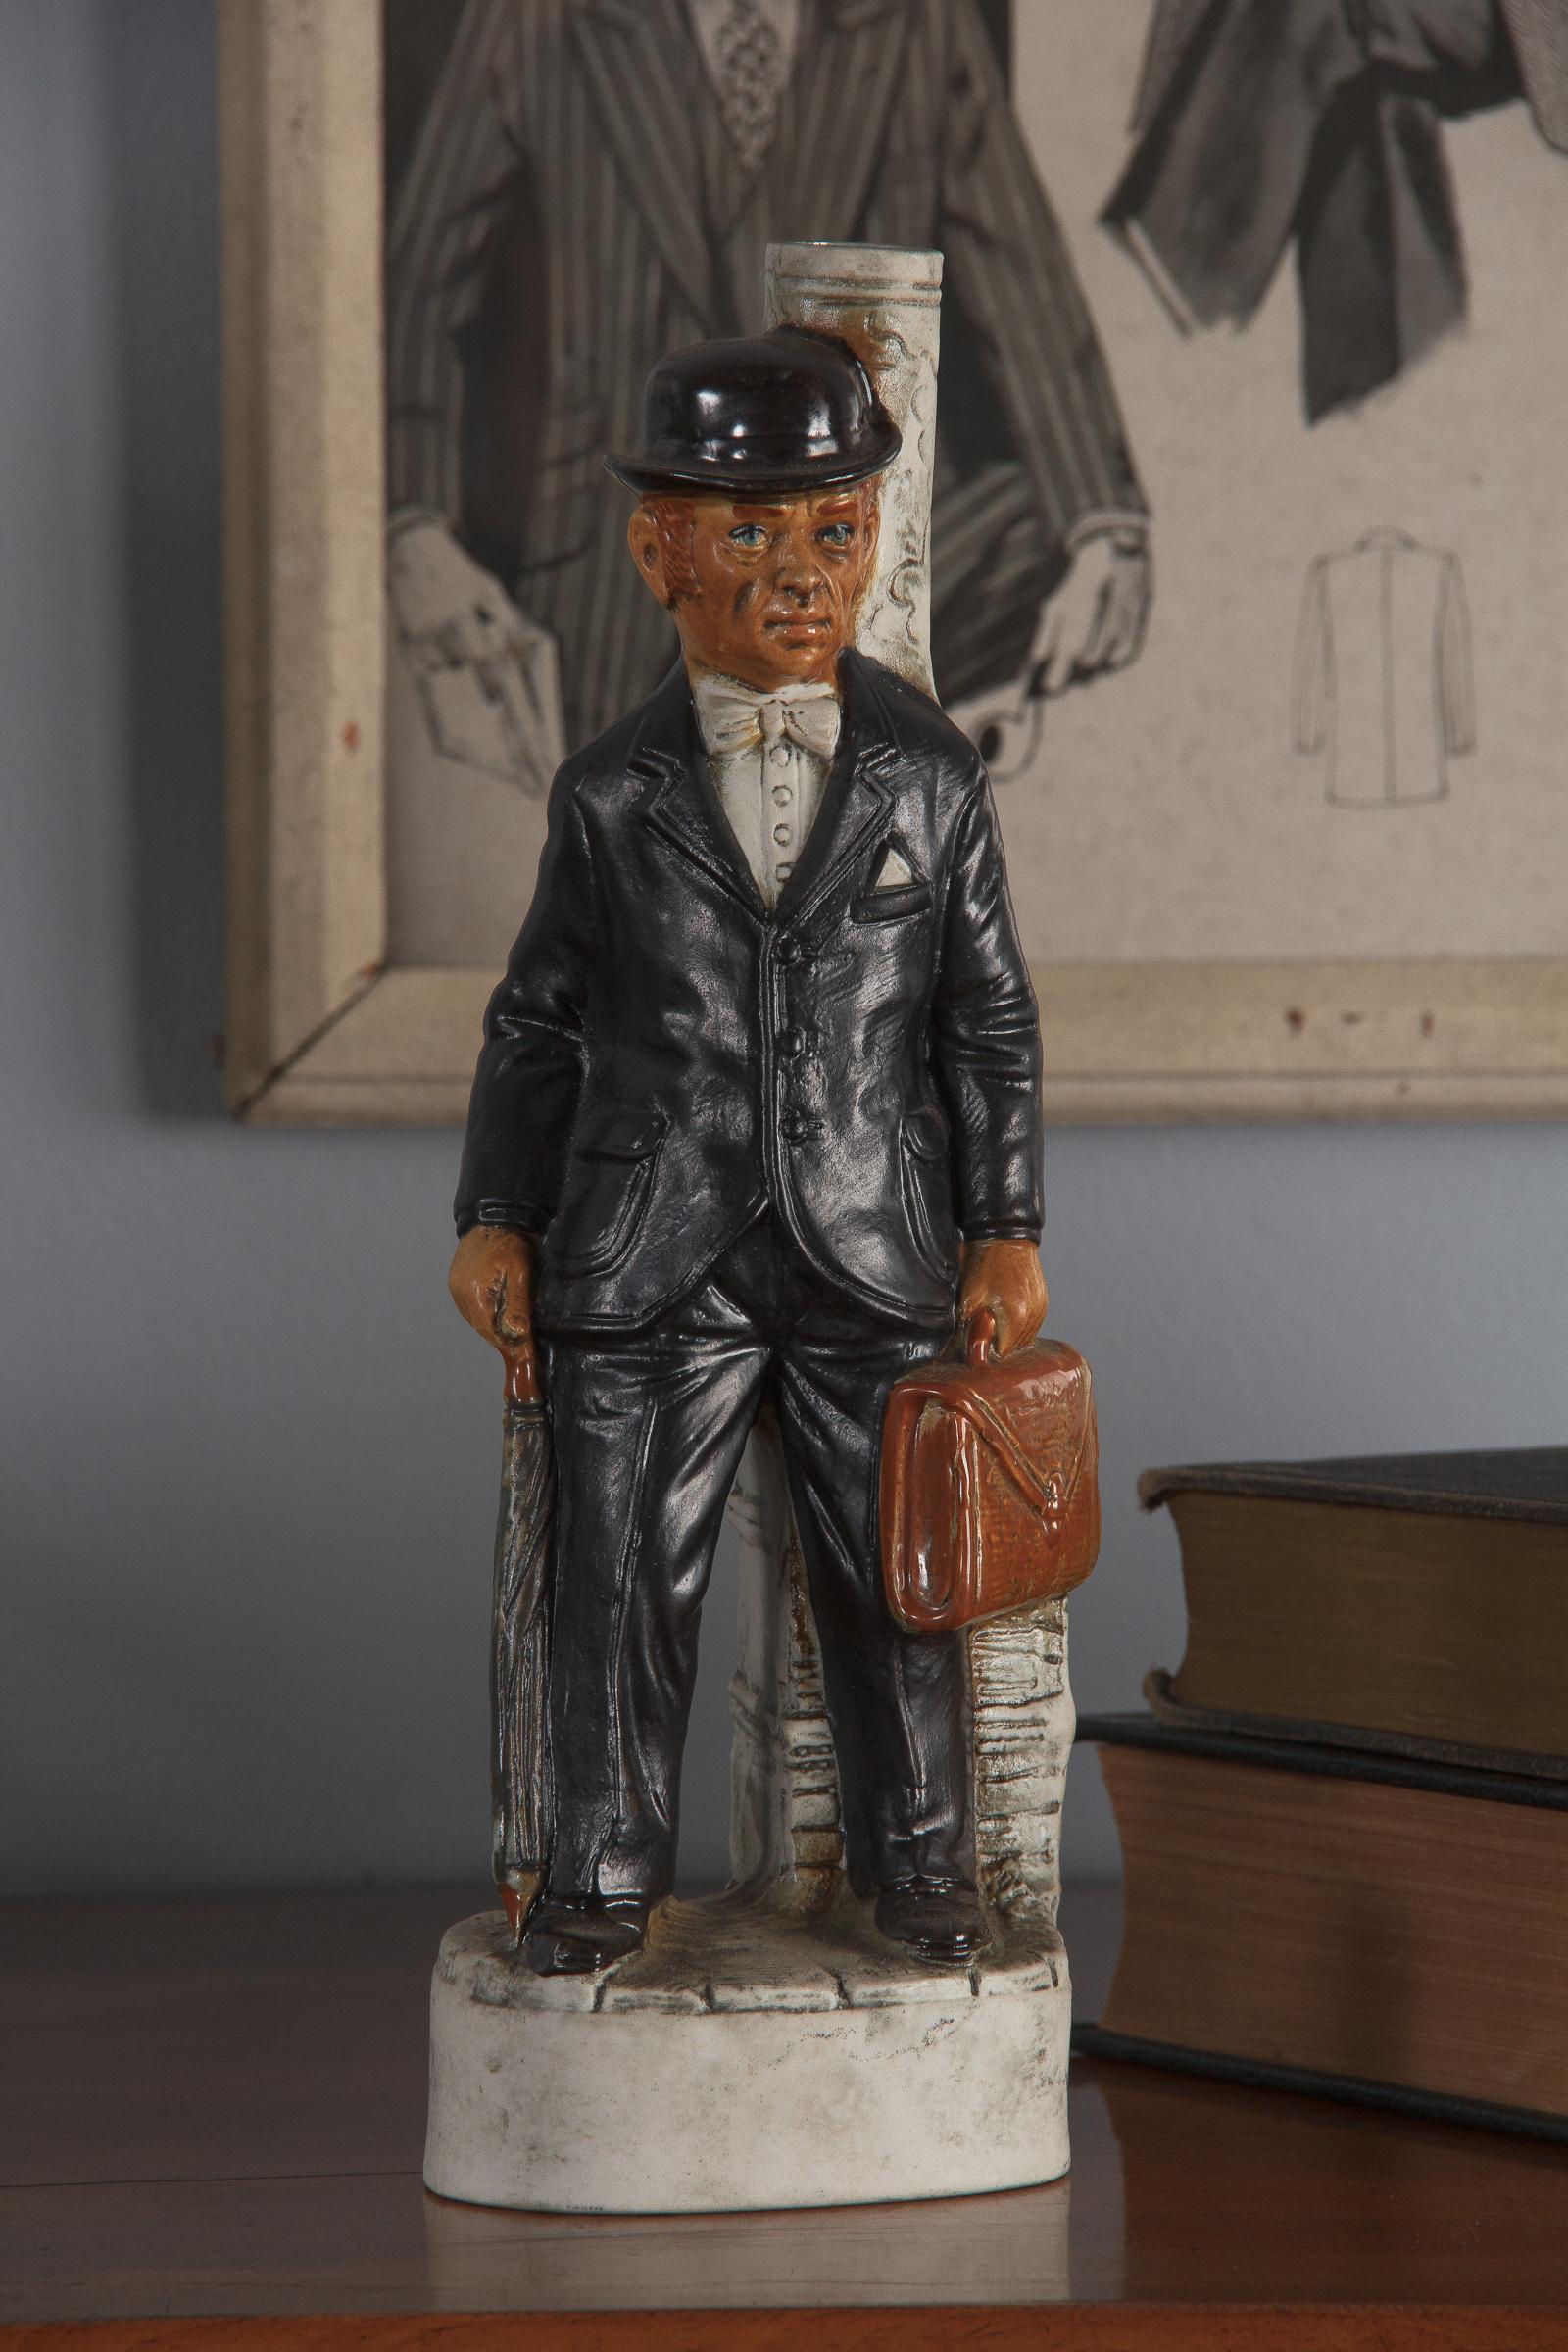 For more than one century, the Garnier liqueurs were sold to the four corners of the world in magnificent artistic bottles. This one is made of ceramic and represents a figurine of a businessman.